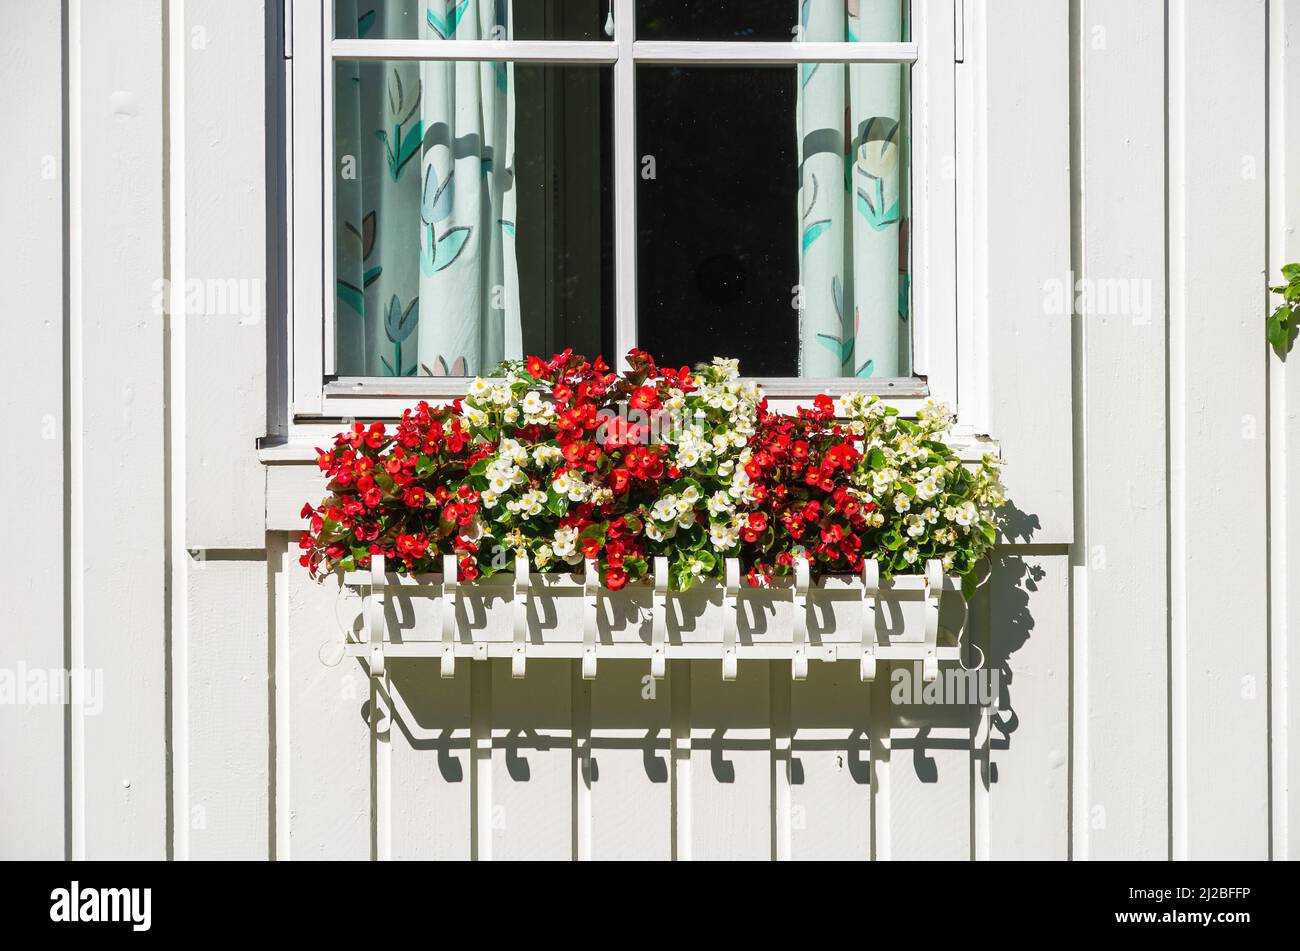 Flower box with red and white flowers at a window of a white wooden house. Stock Photo